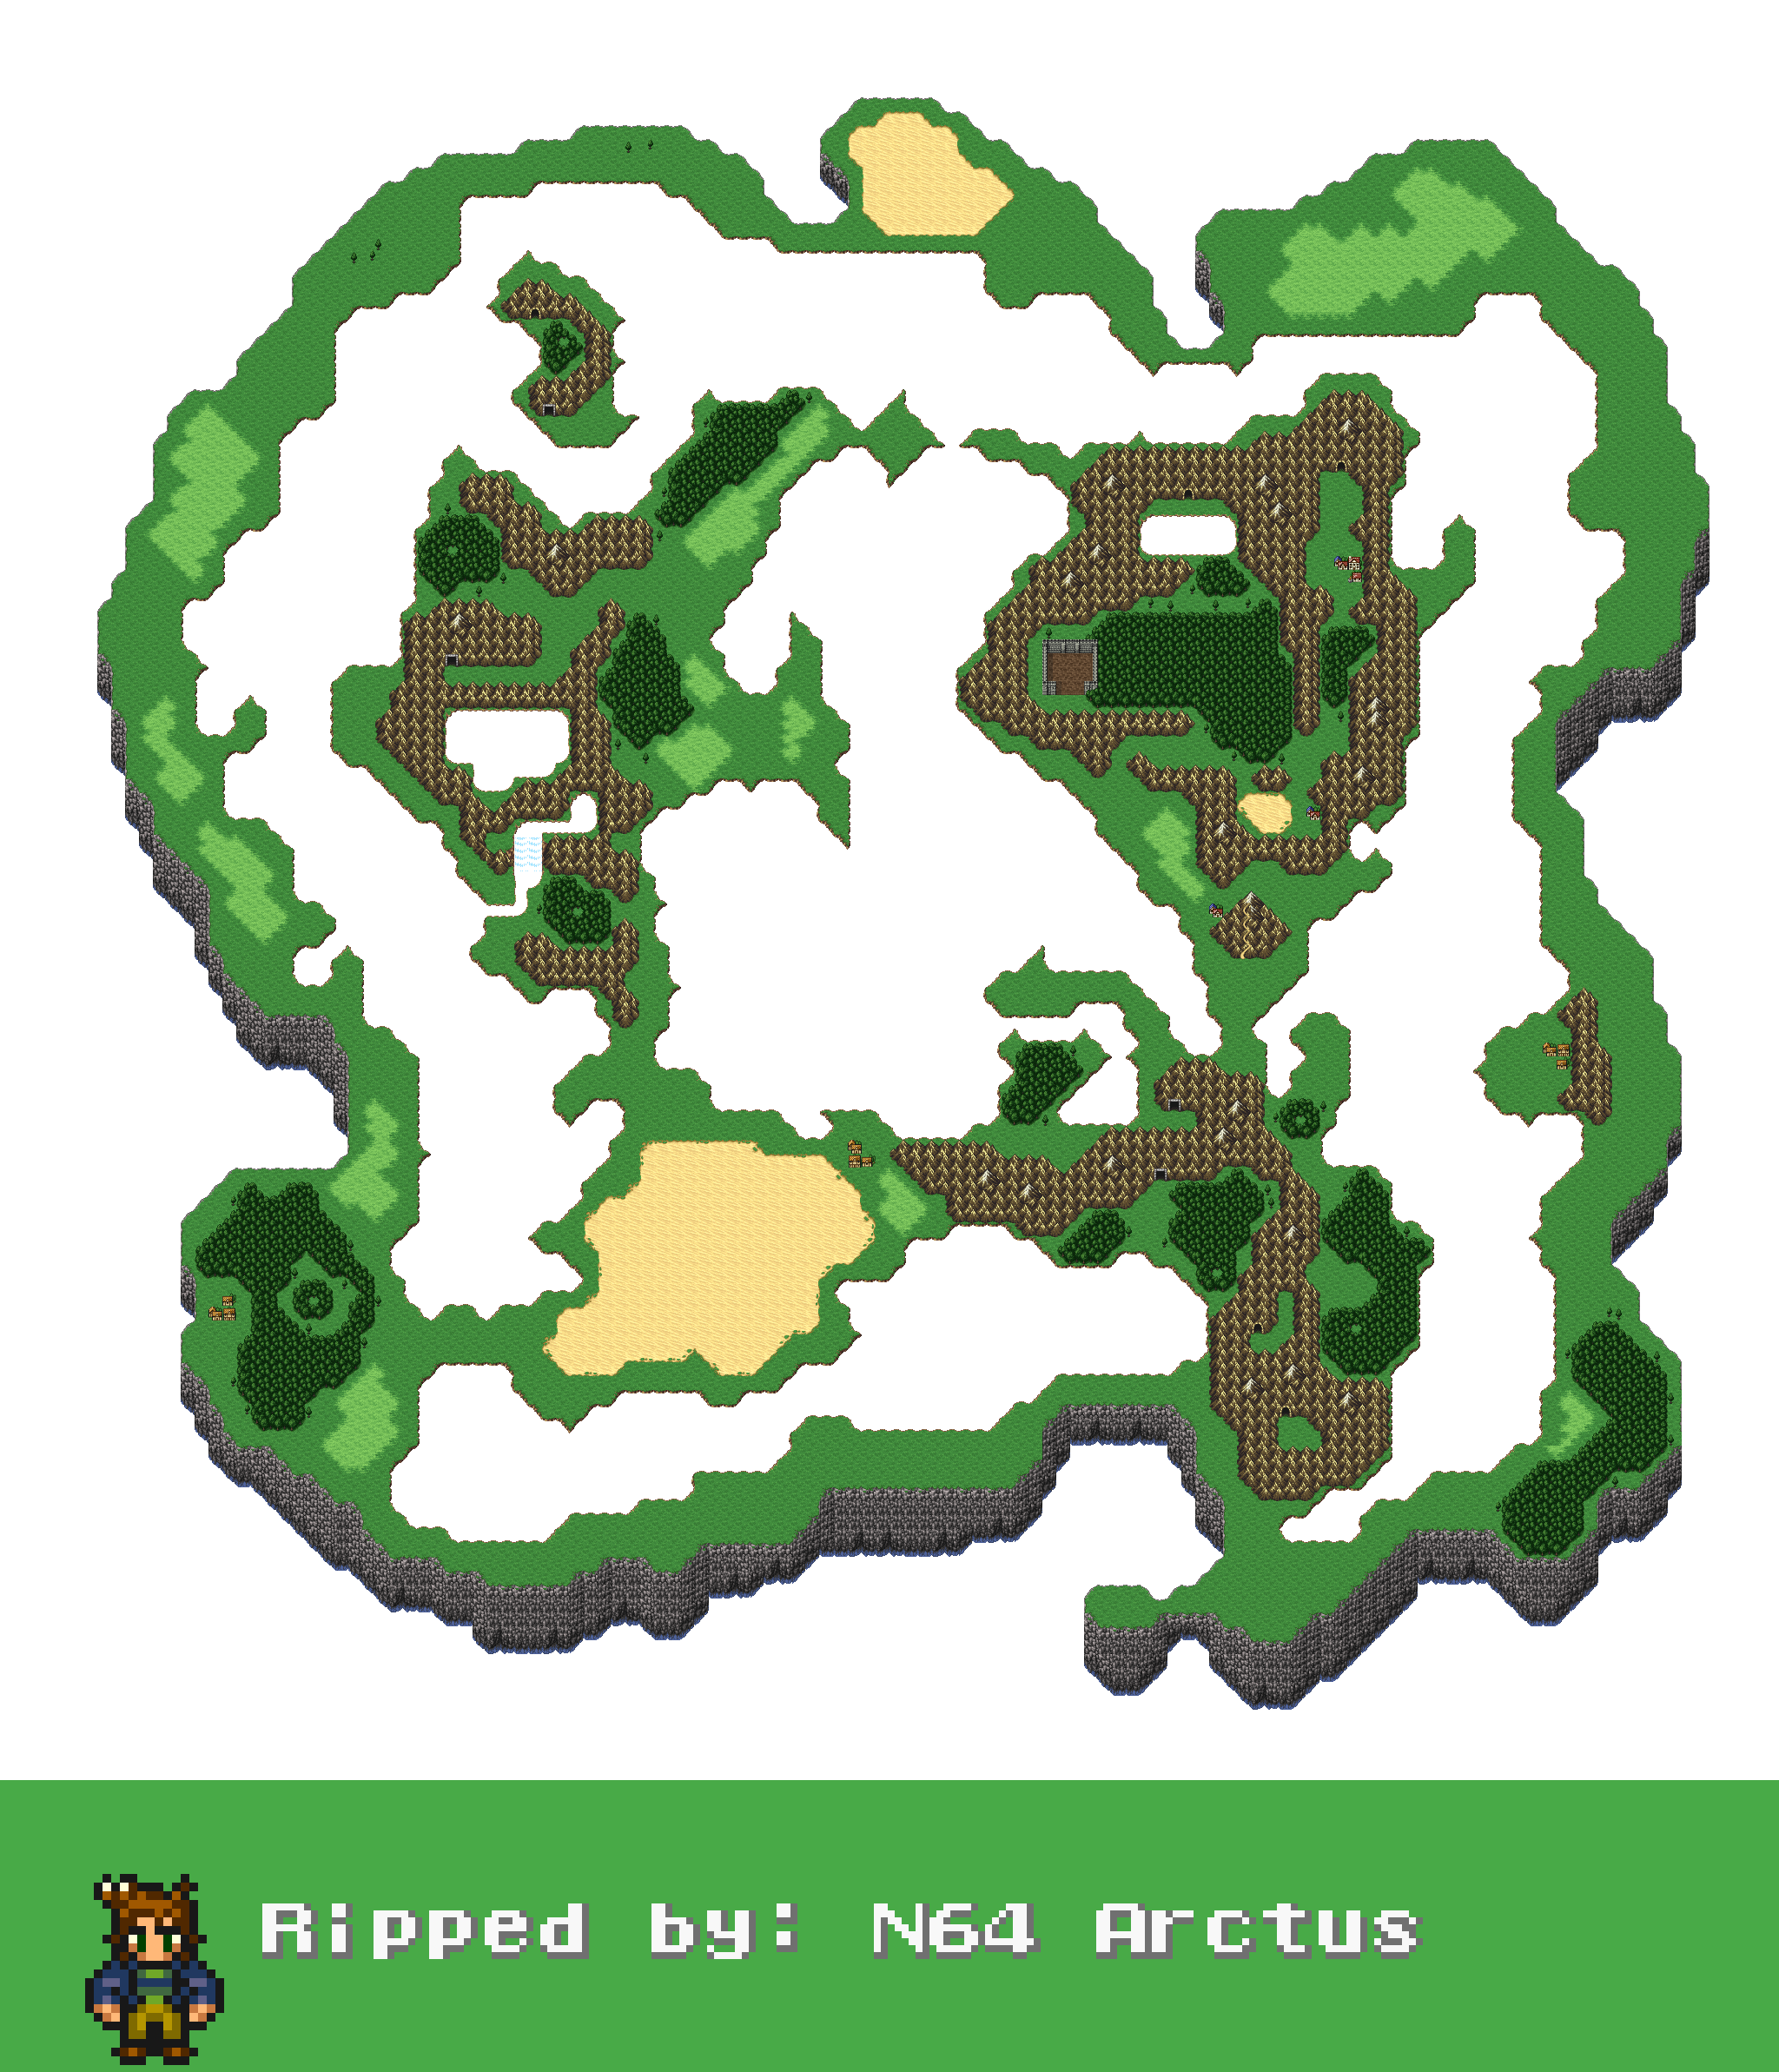 Overworld (Floating Continent)